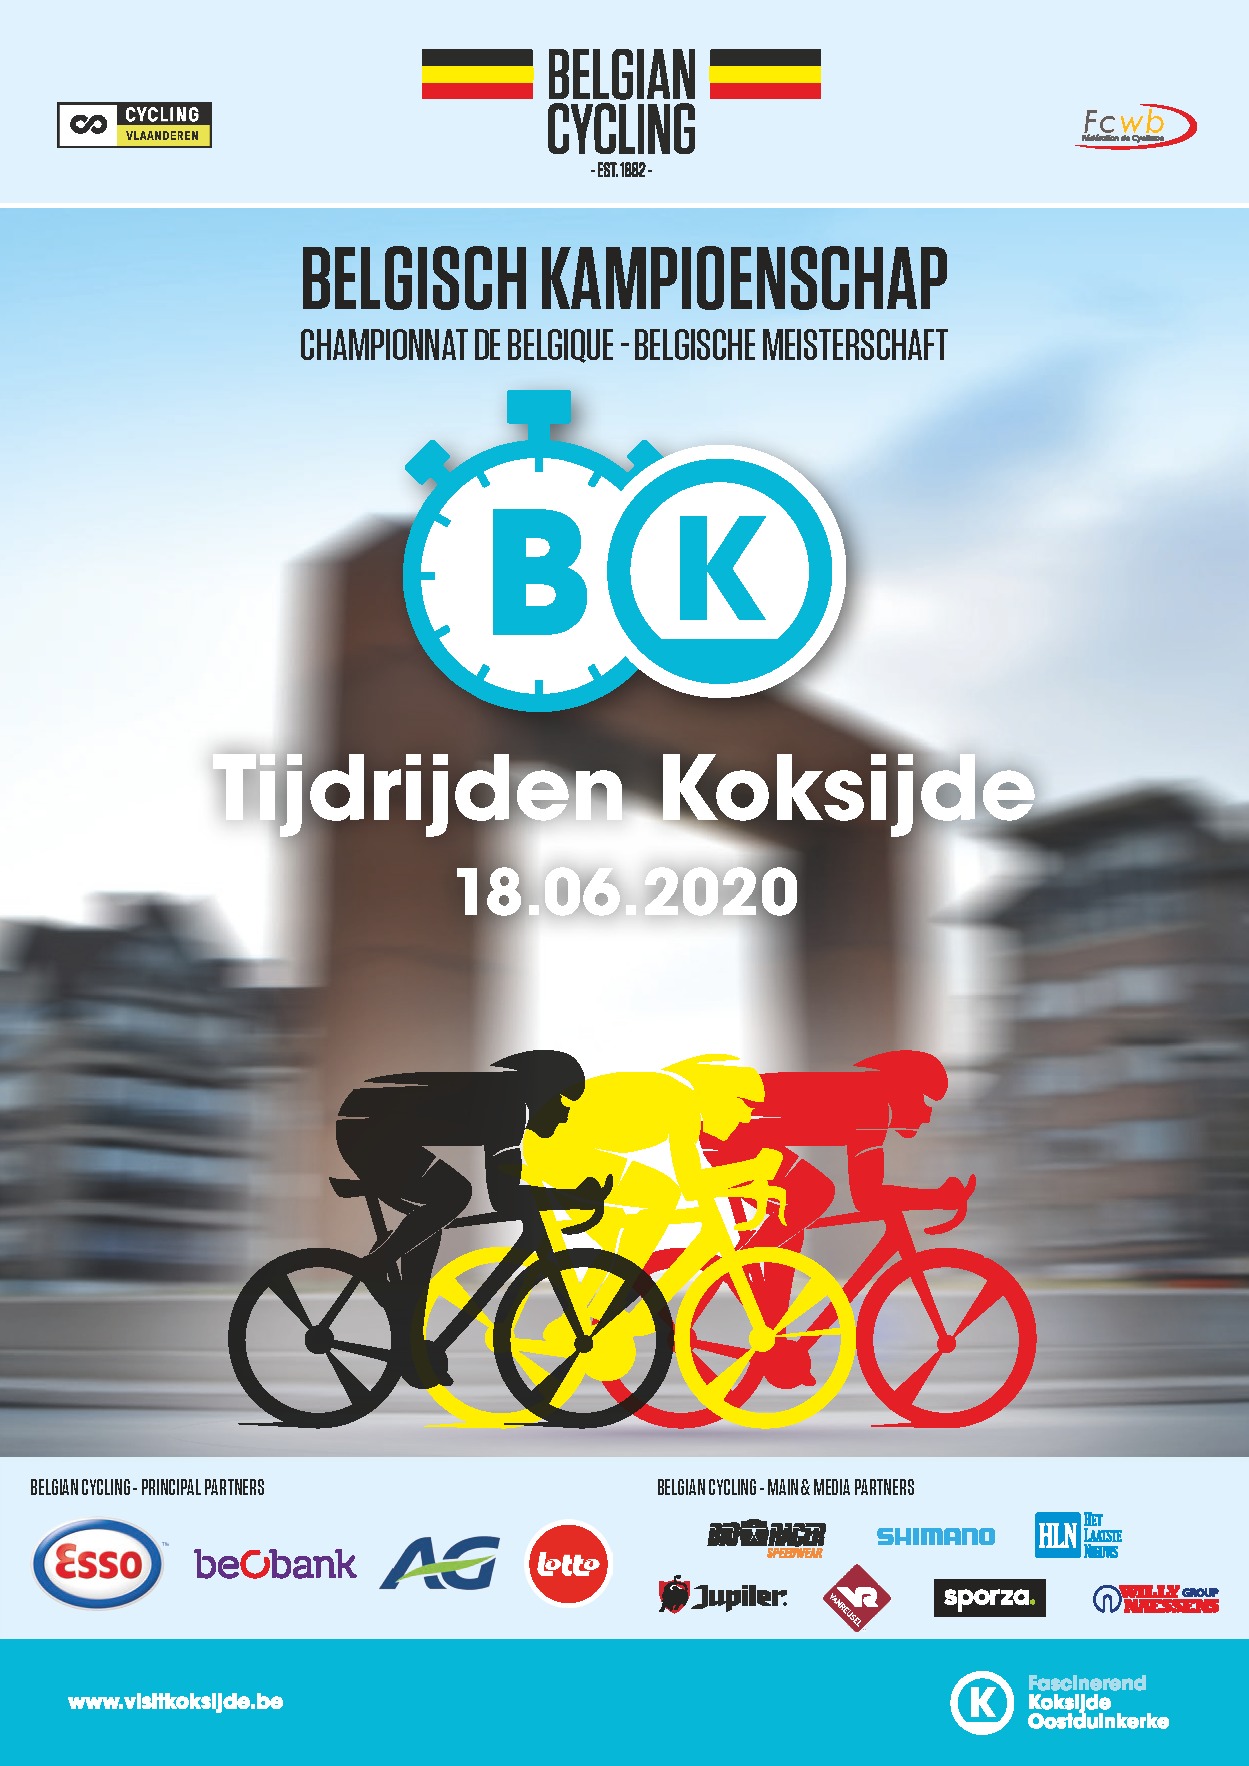 http://www.belgiancycling.be/content.asp?language=nl&id=376&subid=392&sid=377